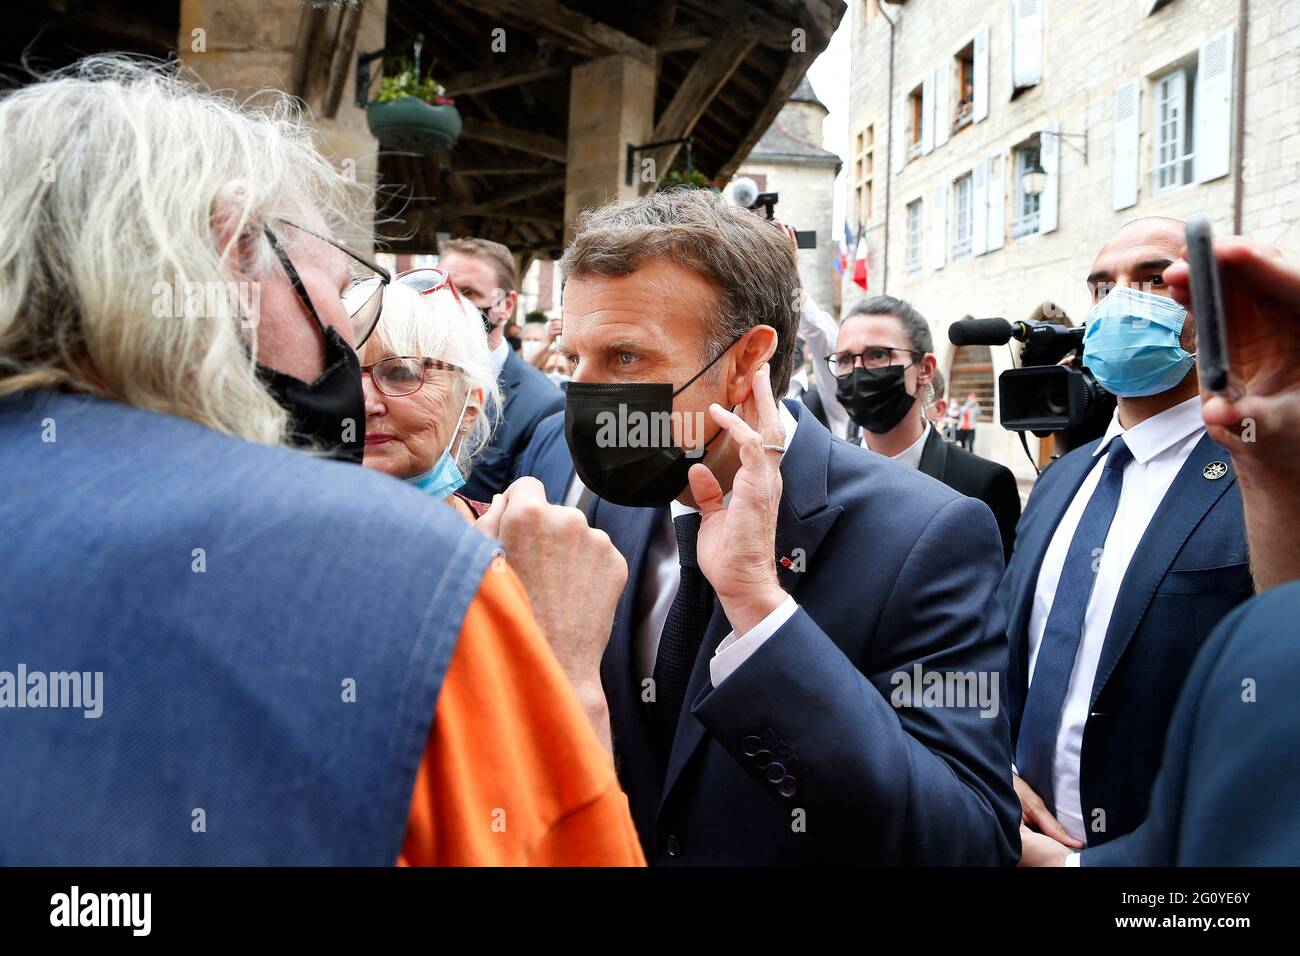 Martel, France. June 3 2021: French President Emmanuel Macron meets locals on June 3, 2021 in Martel during a two-days visit in the southern France department of Lot, the first stage of a nationwide tour ahead of next year's presidential election, in a risky repeat of previous meet-and-greet initiatives that saw him heckled by angry voters. The 43-year-old liberal, widely expected to seek a second term in polls next April and May, will begun what he calls the task of "measuring the country's pulse" in picturesque villages in southwest France. Credit: Abaca Press/Alamy Live News Stock Photo